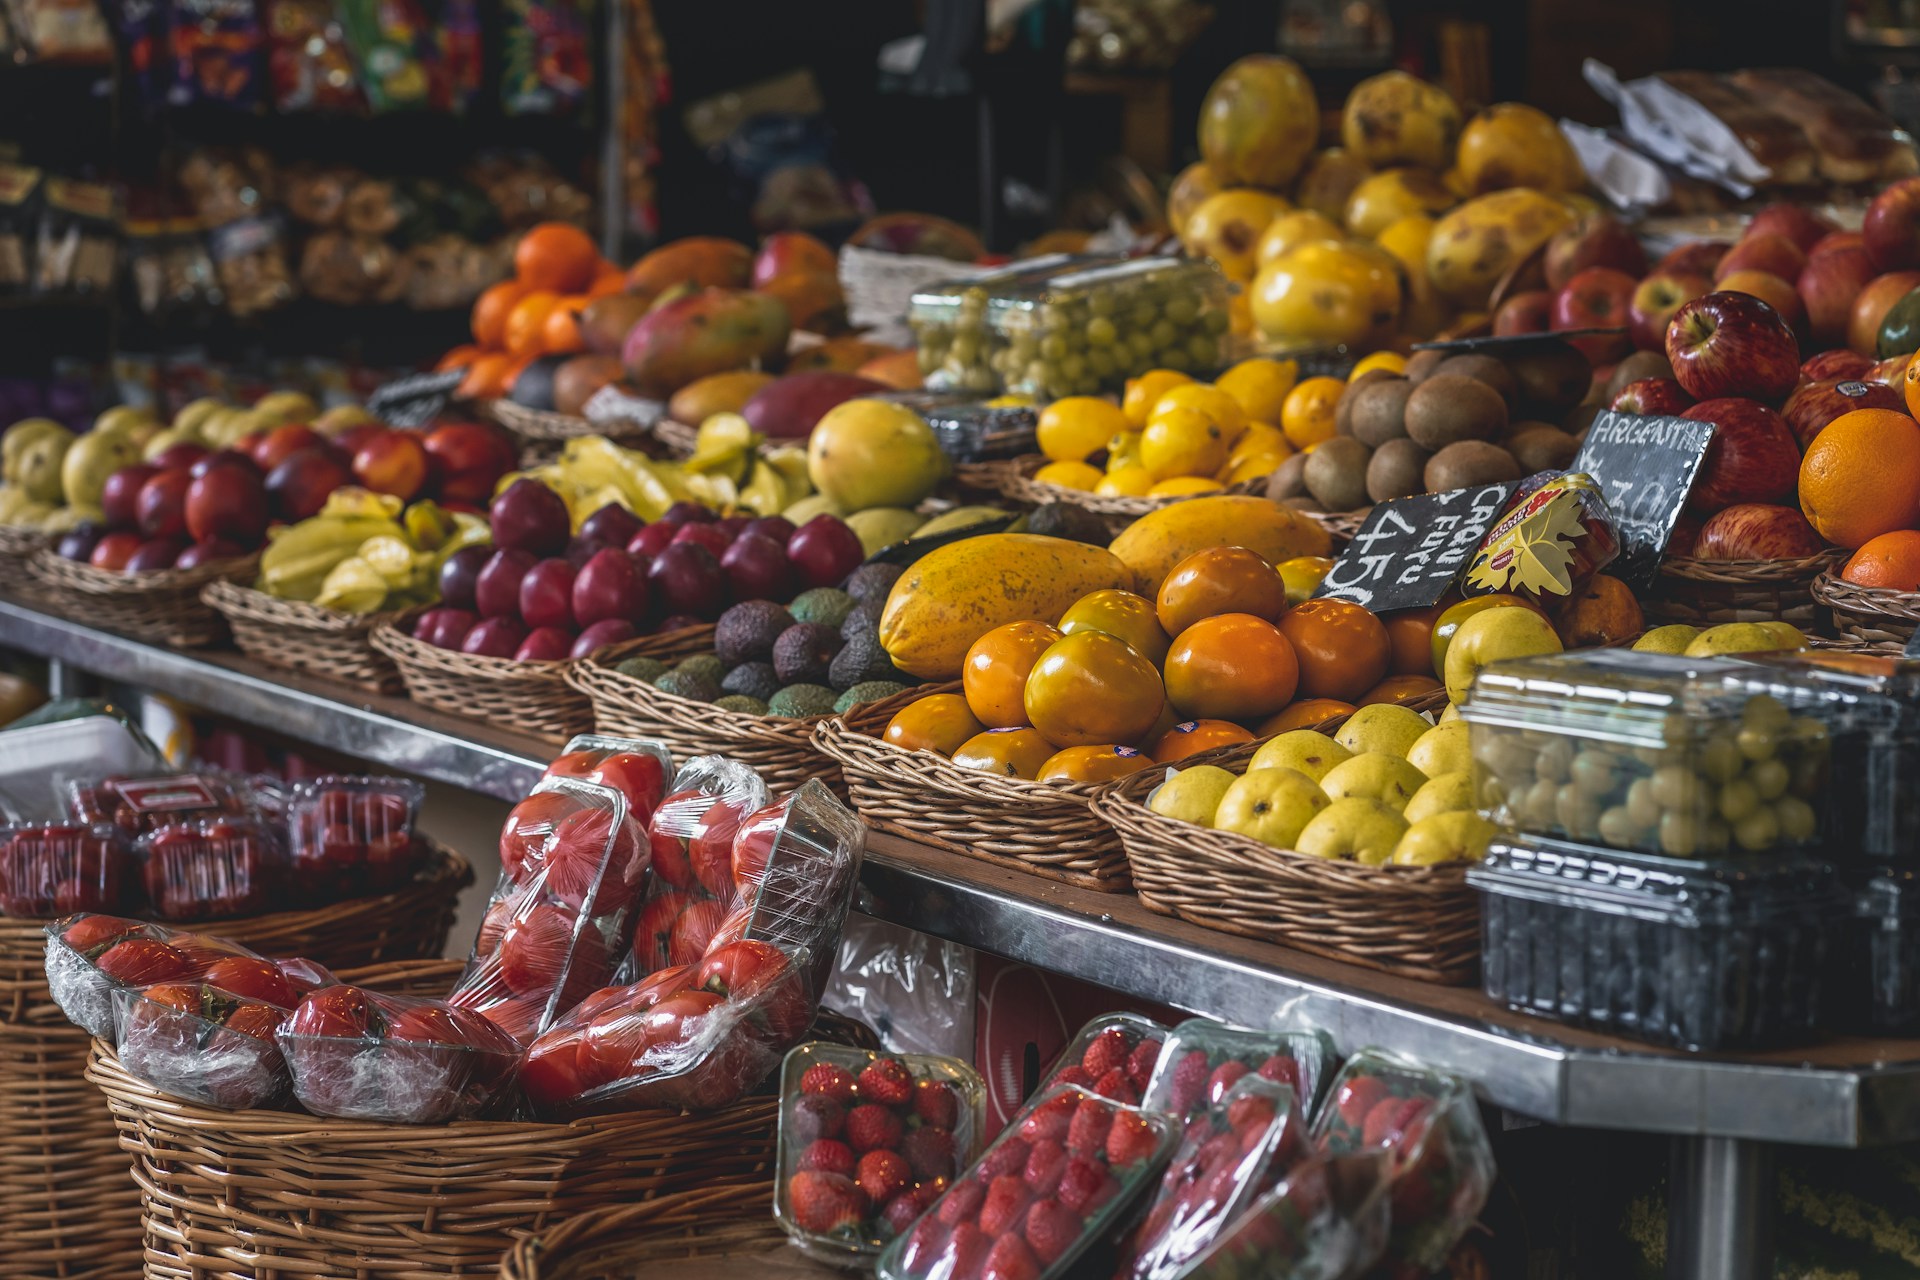 7 Emergency Response Tips for Produce Retailers